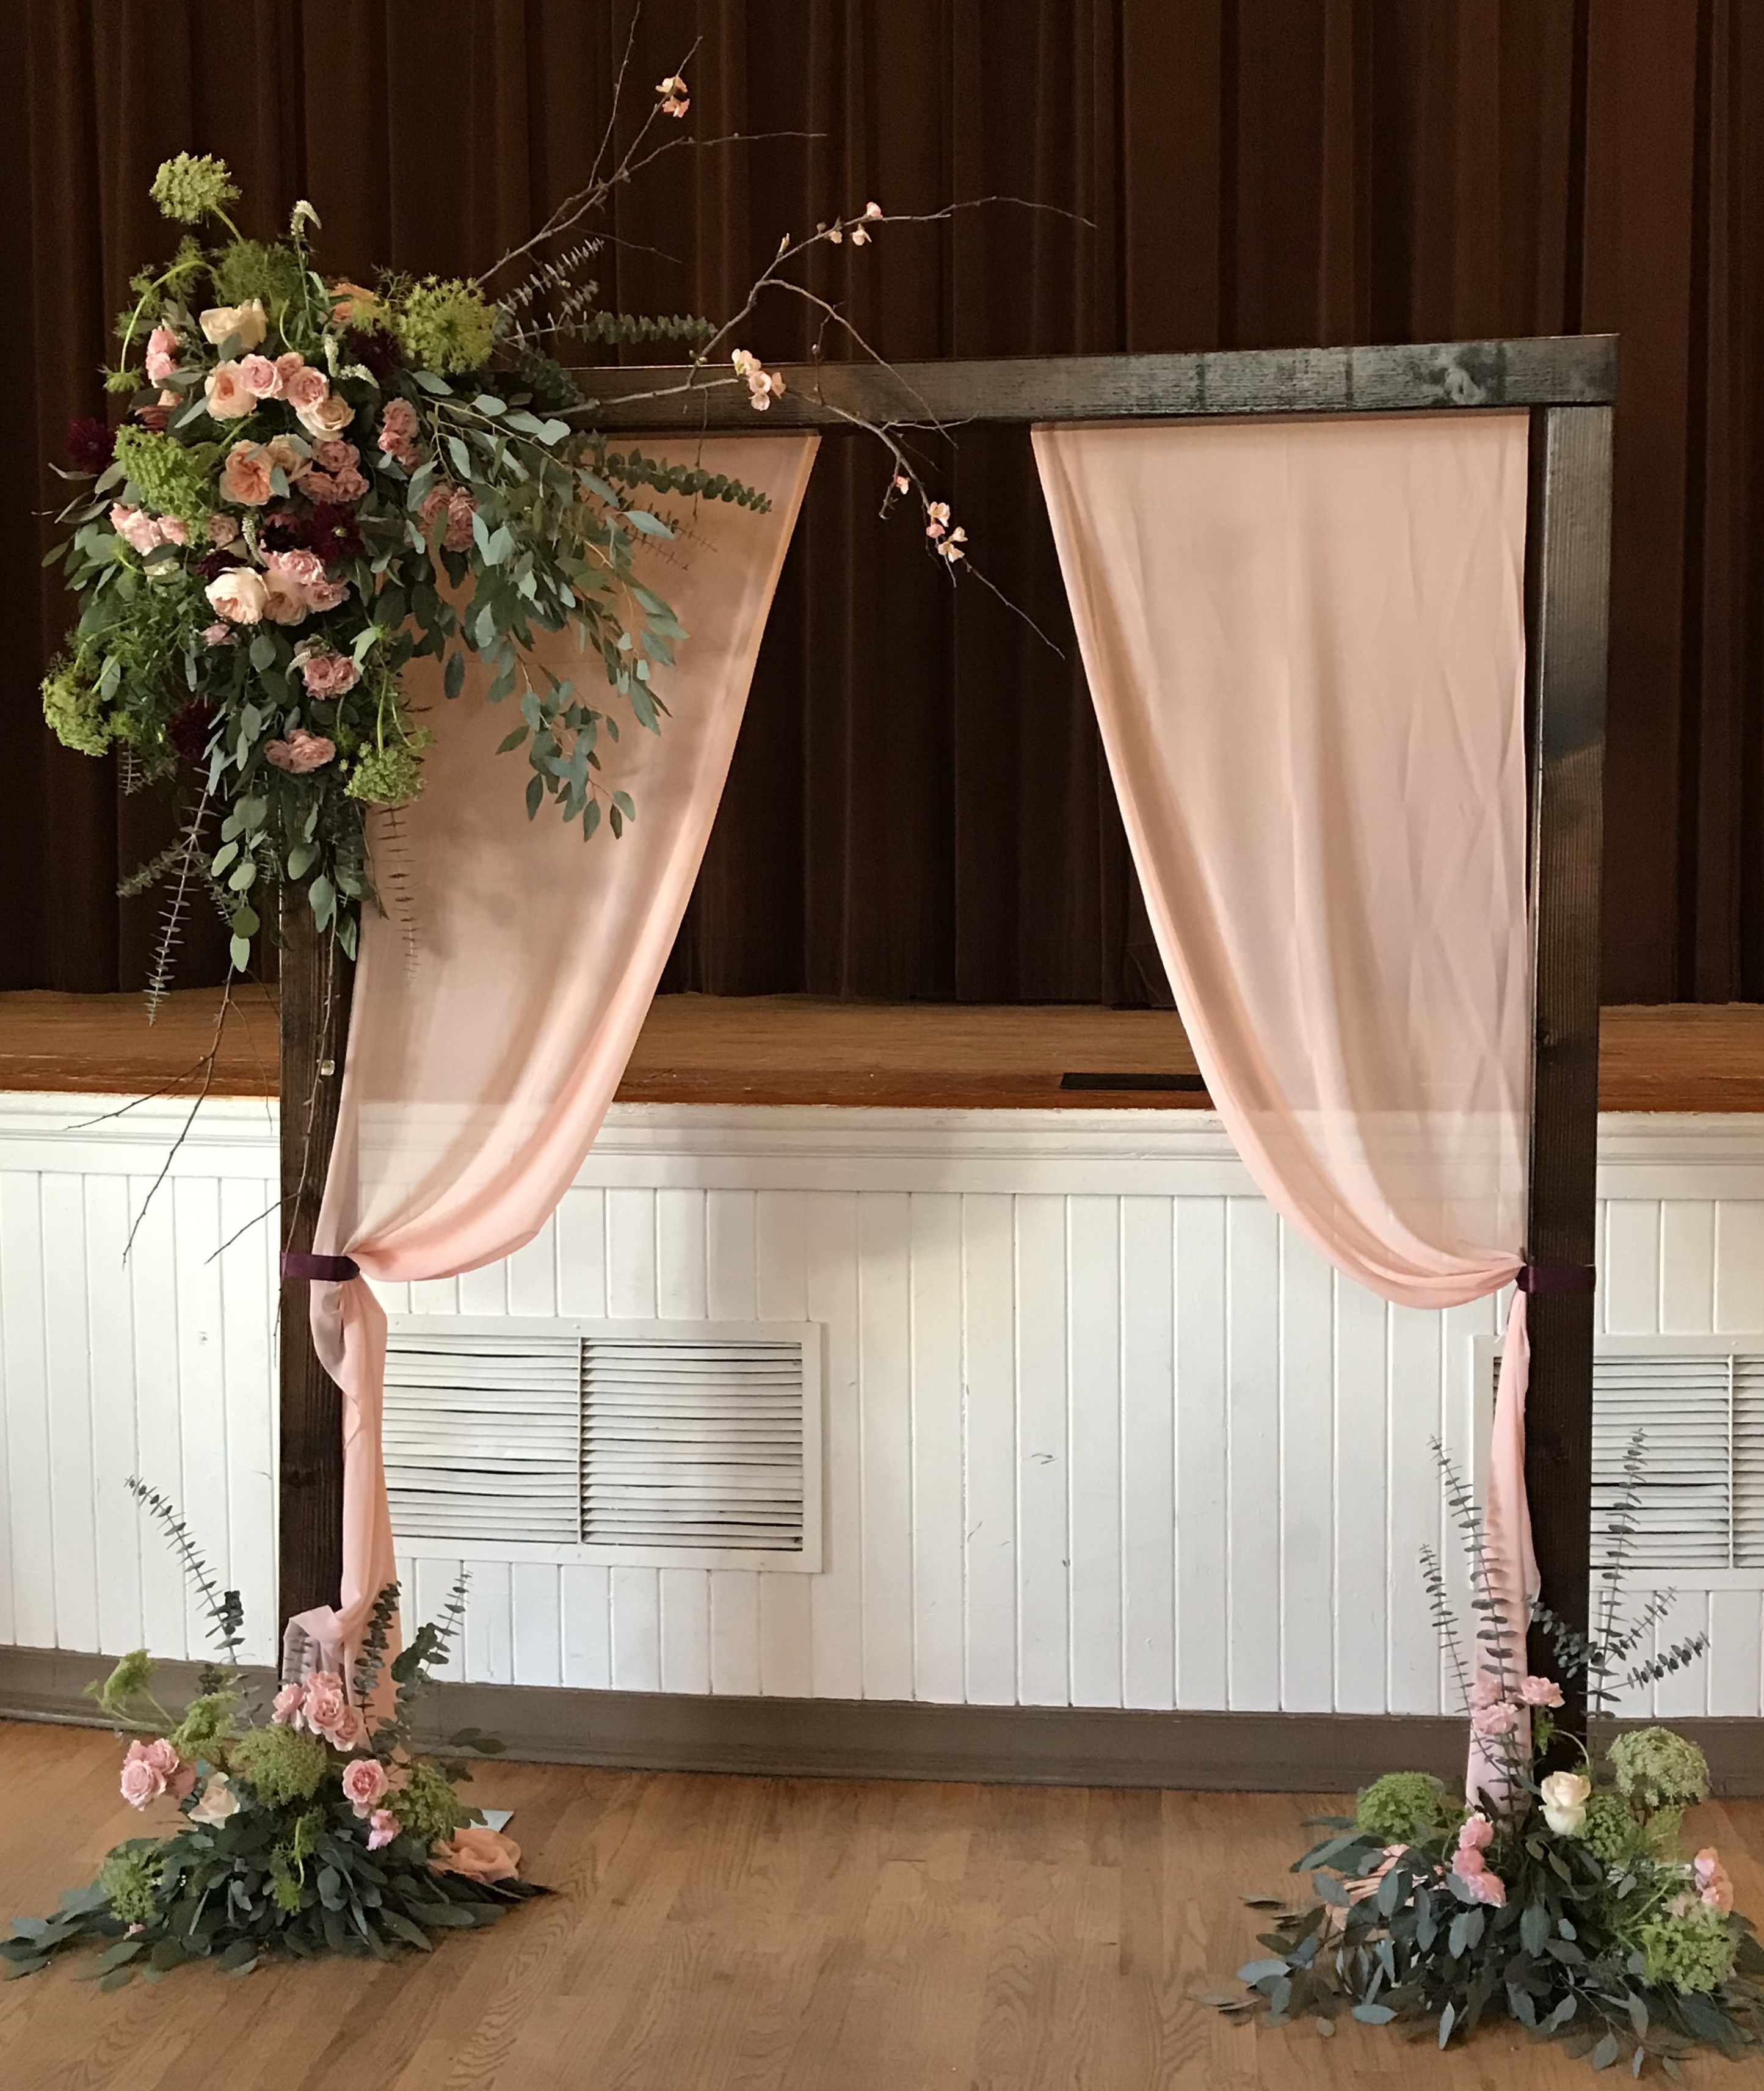 Wooden arbor with bohemian flower types and draping, it has feather eucalyptus, roses, spray roses, dahlias, queen anne's lace, baby blue eucalyptus with blush chiffon drapes. 